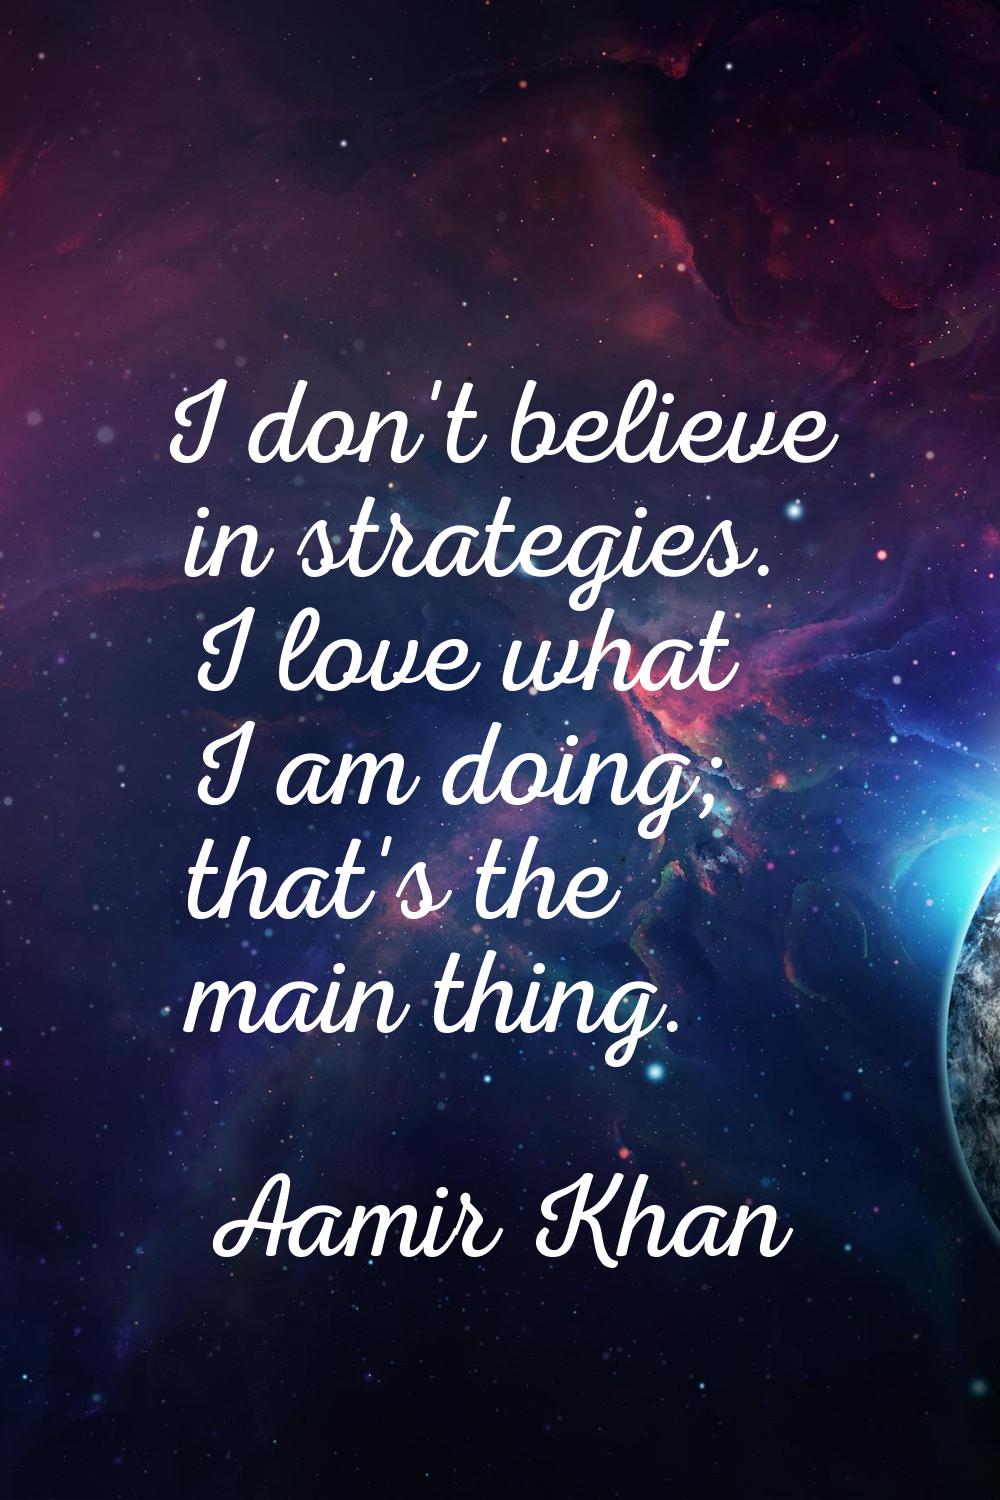 I don't believe in strategies. I love what I am doing; that's the main thing.